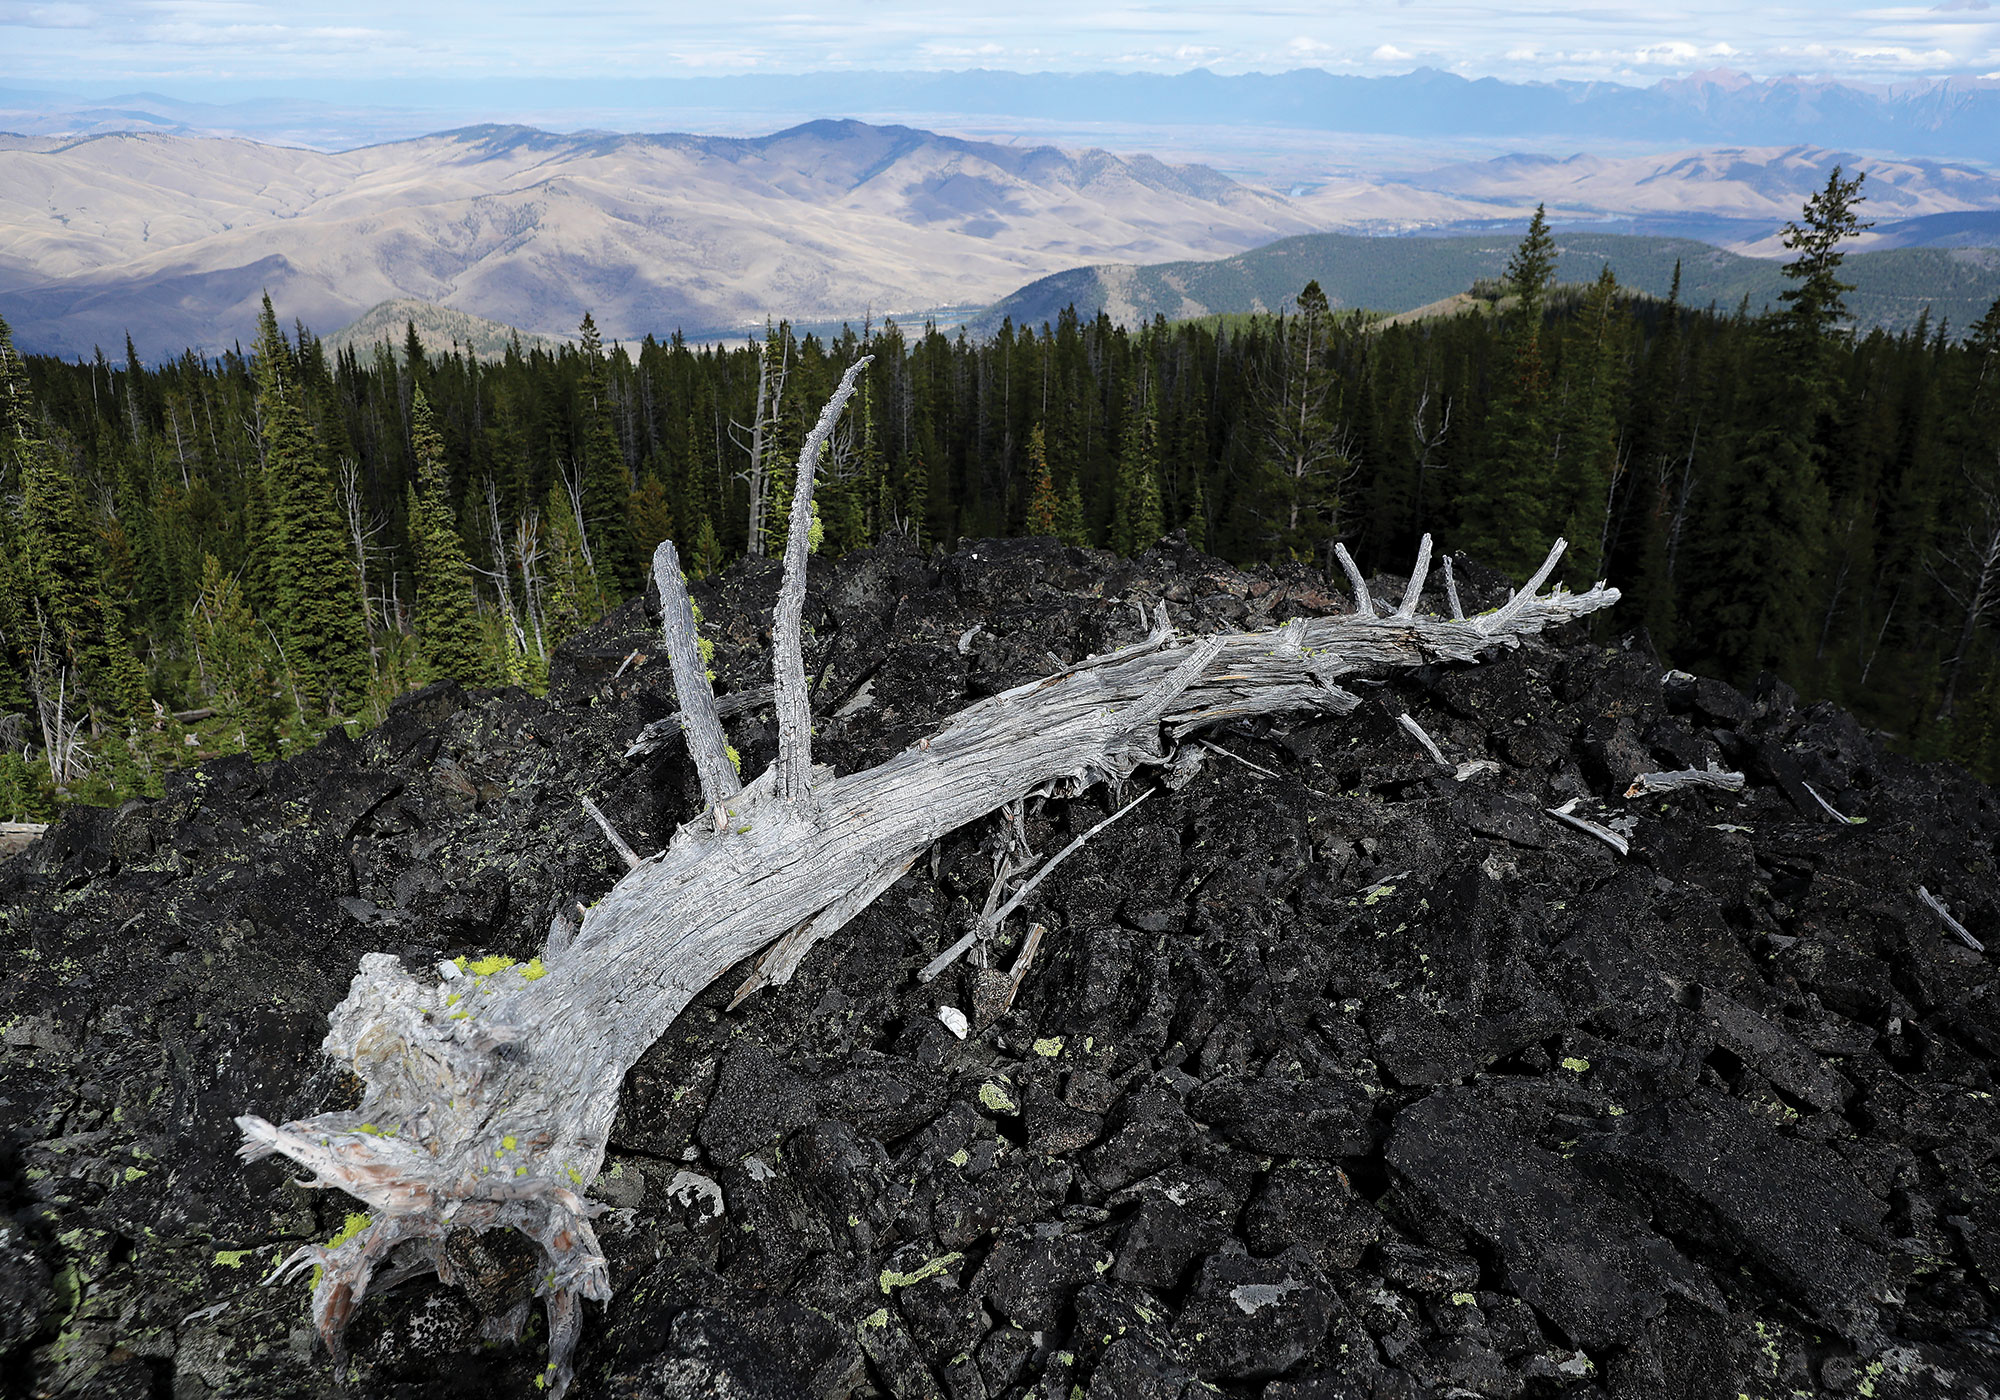 Sun-bleached skeleton of white-bark pine tree at the top of a ridge on Flathead Indian Reservation